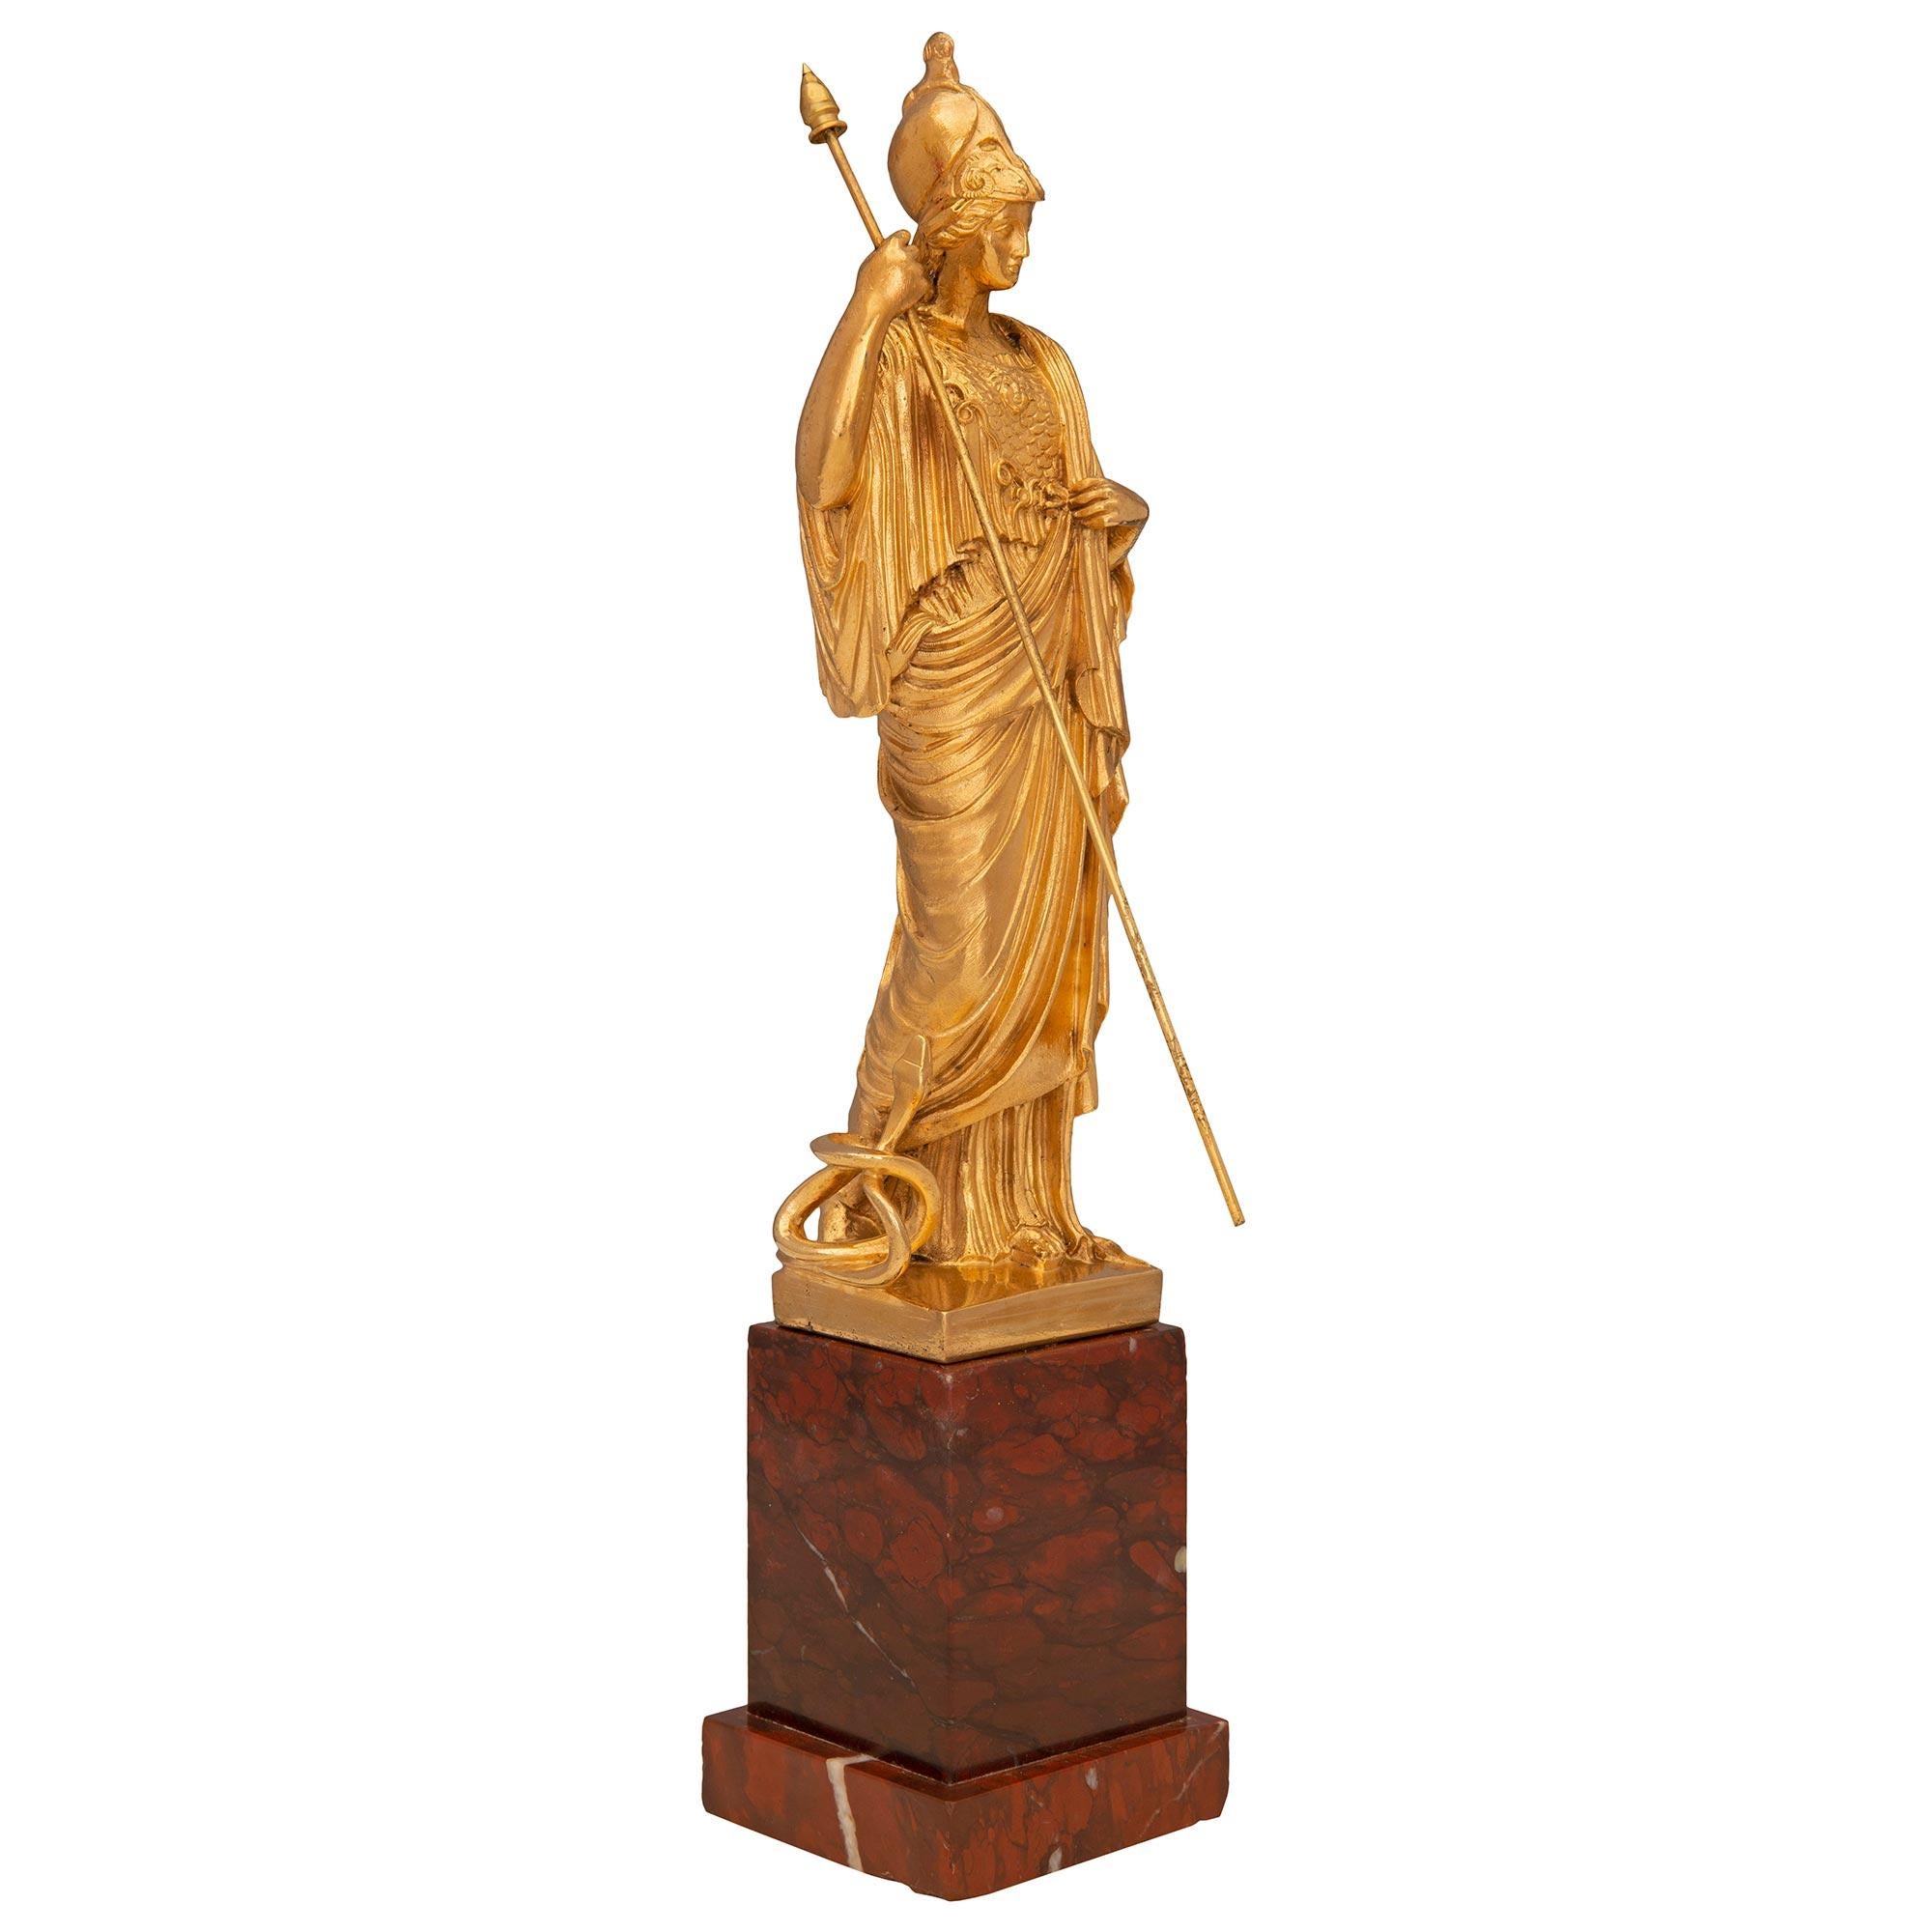 A striking and very high quality French 19th century neo-classical st. ormolu and Rouge Griotte statue of Athena. The statue is raised by an elegant square Rouge Griotte marble base with a fine stepped design. The impressive and finely detailed